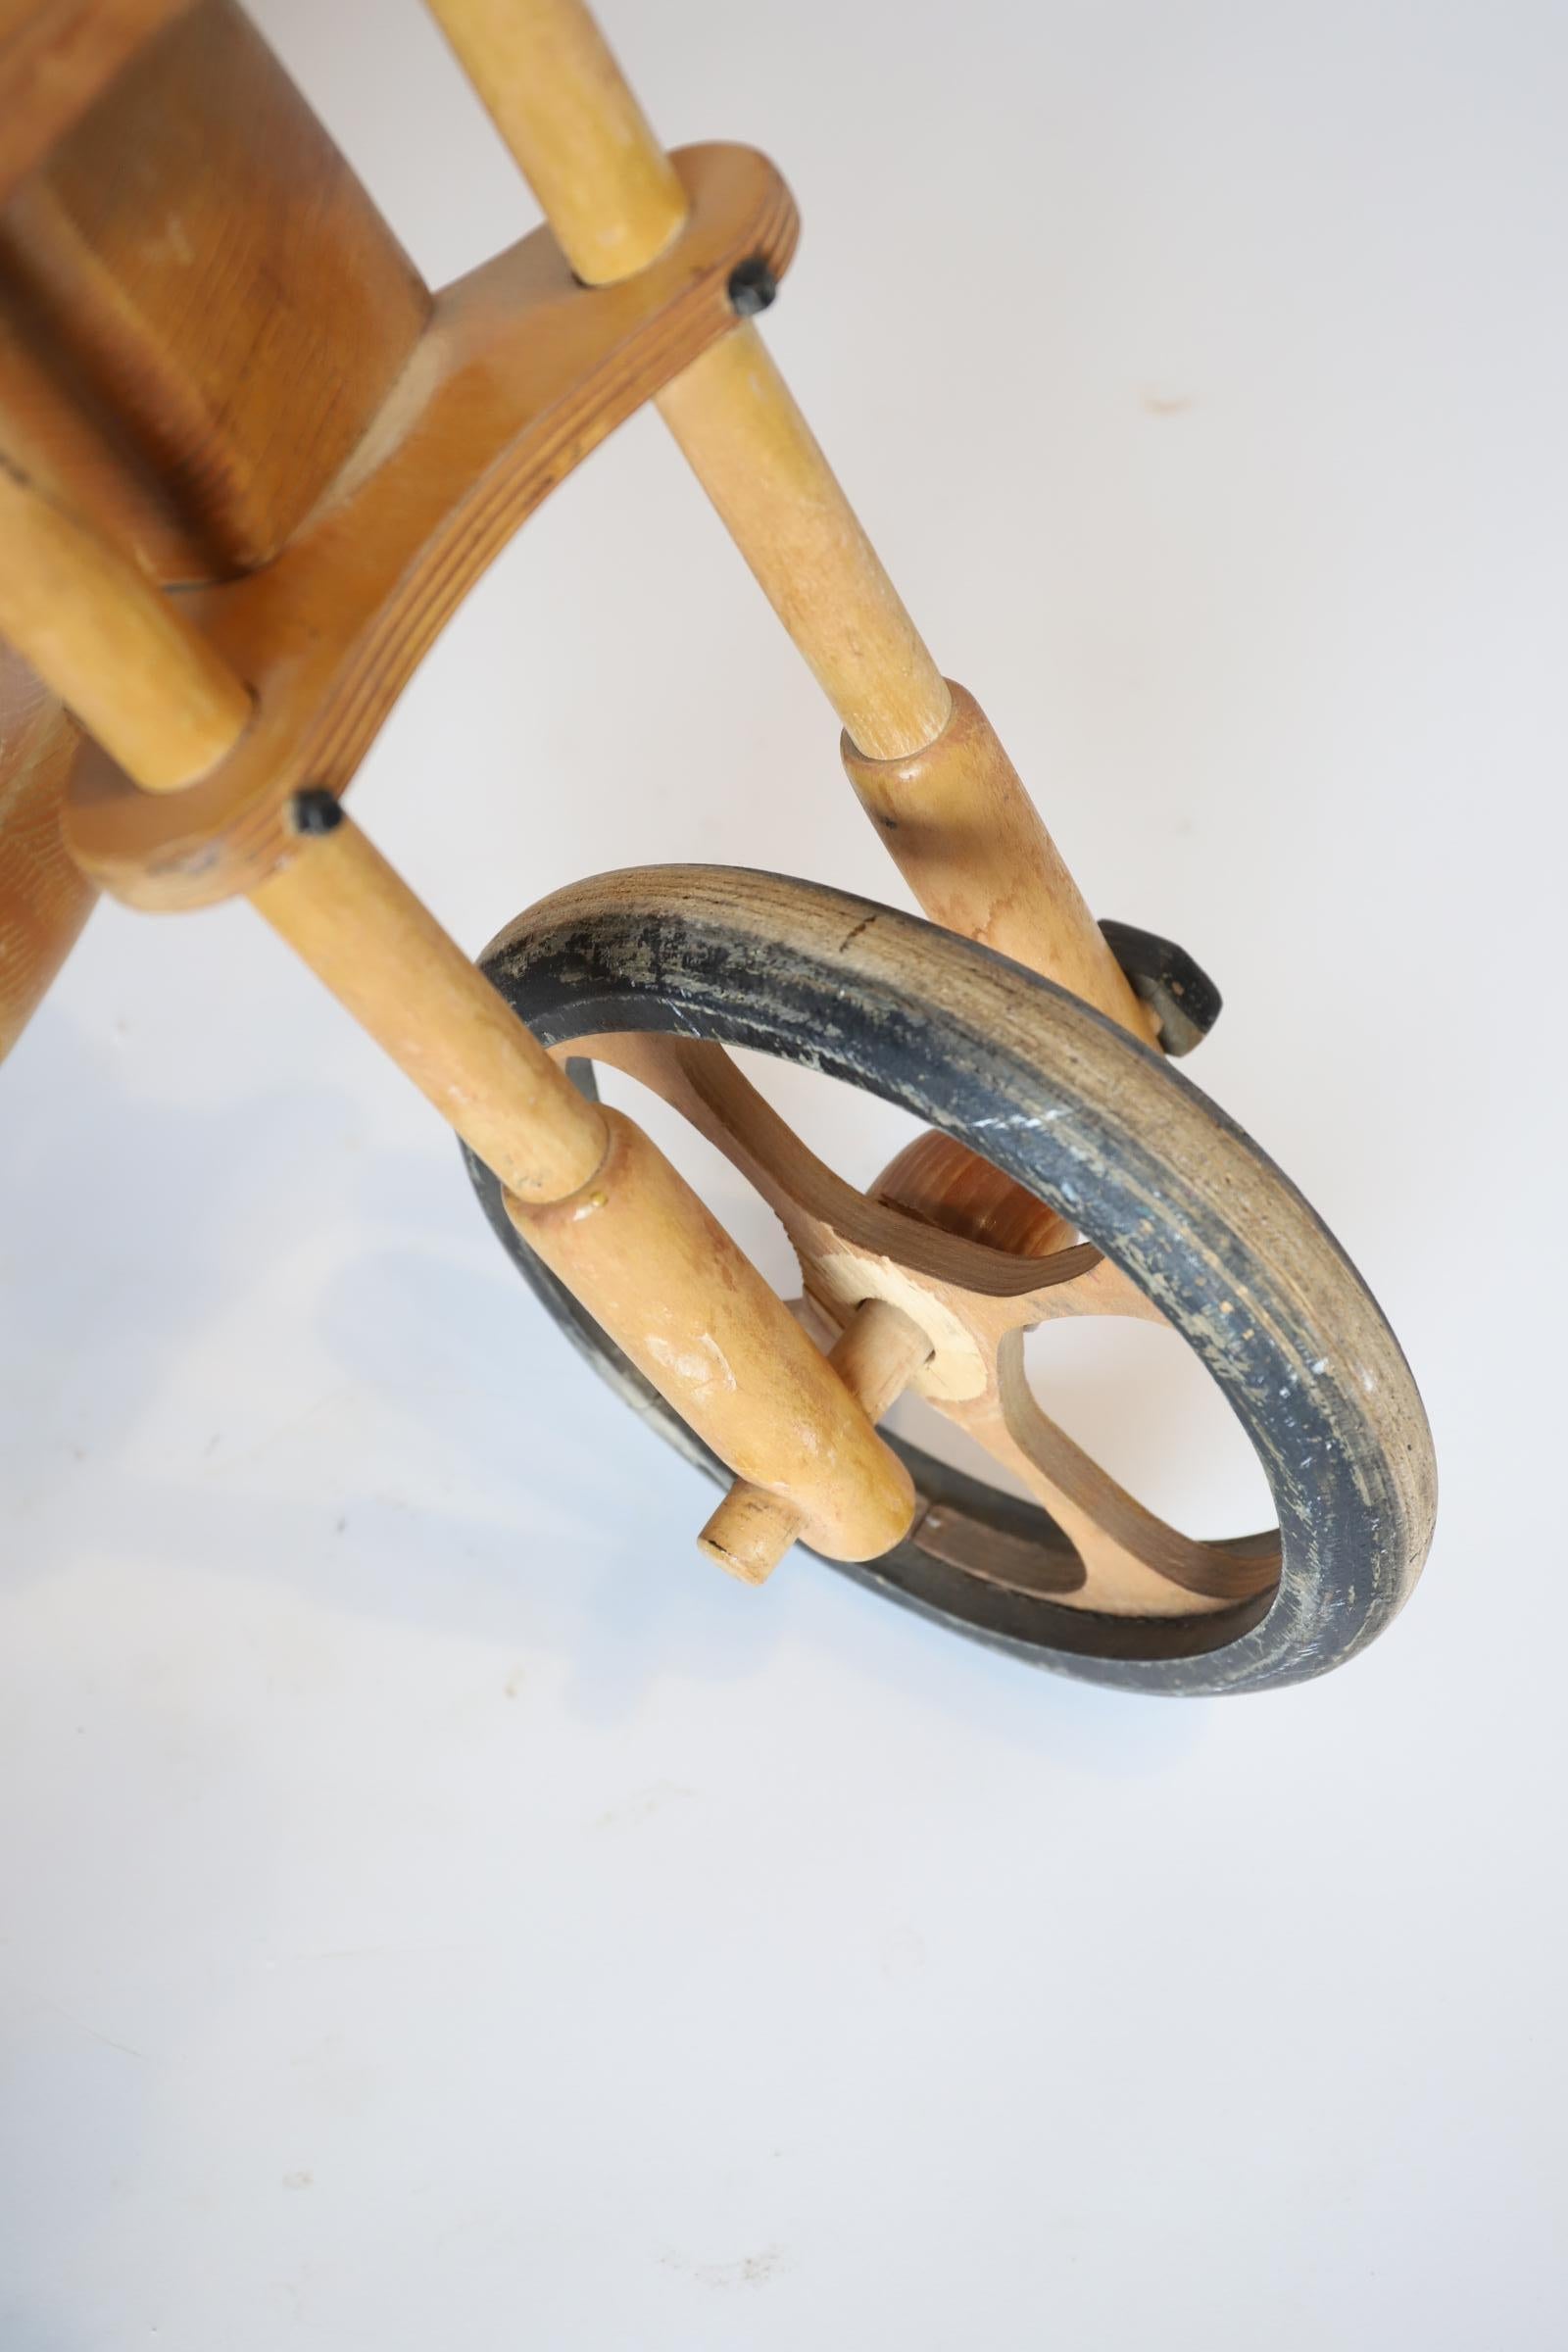 wooden motorcycle toy